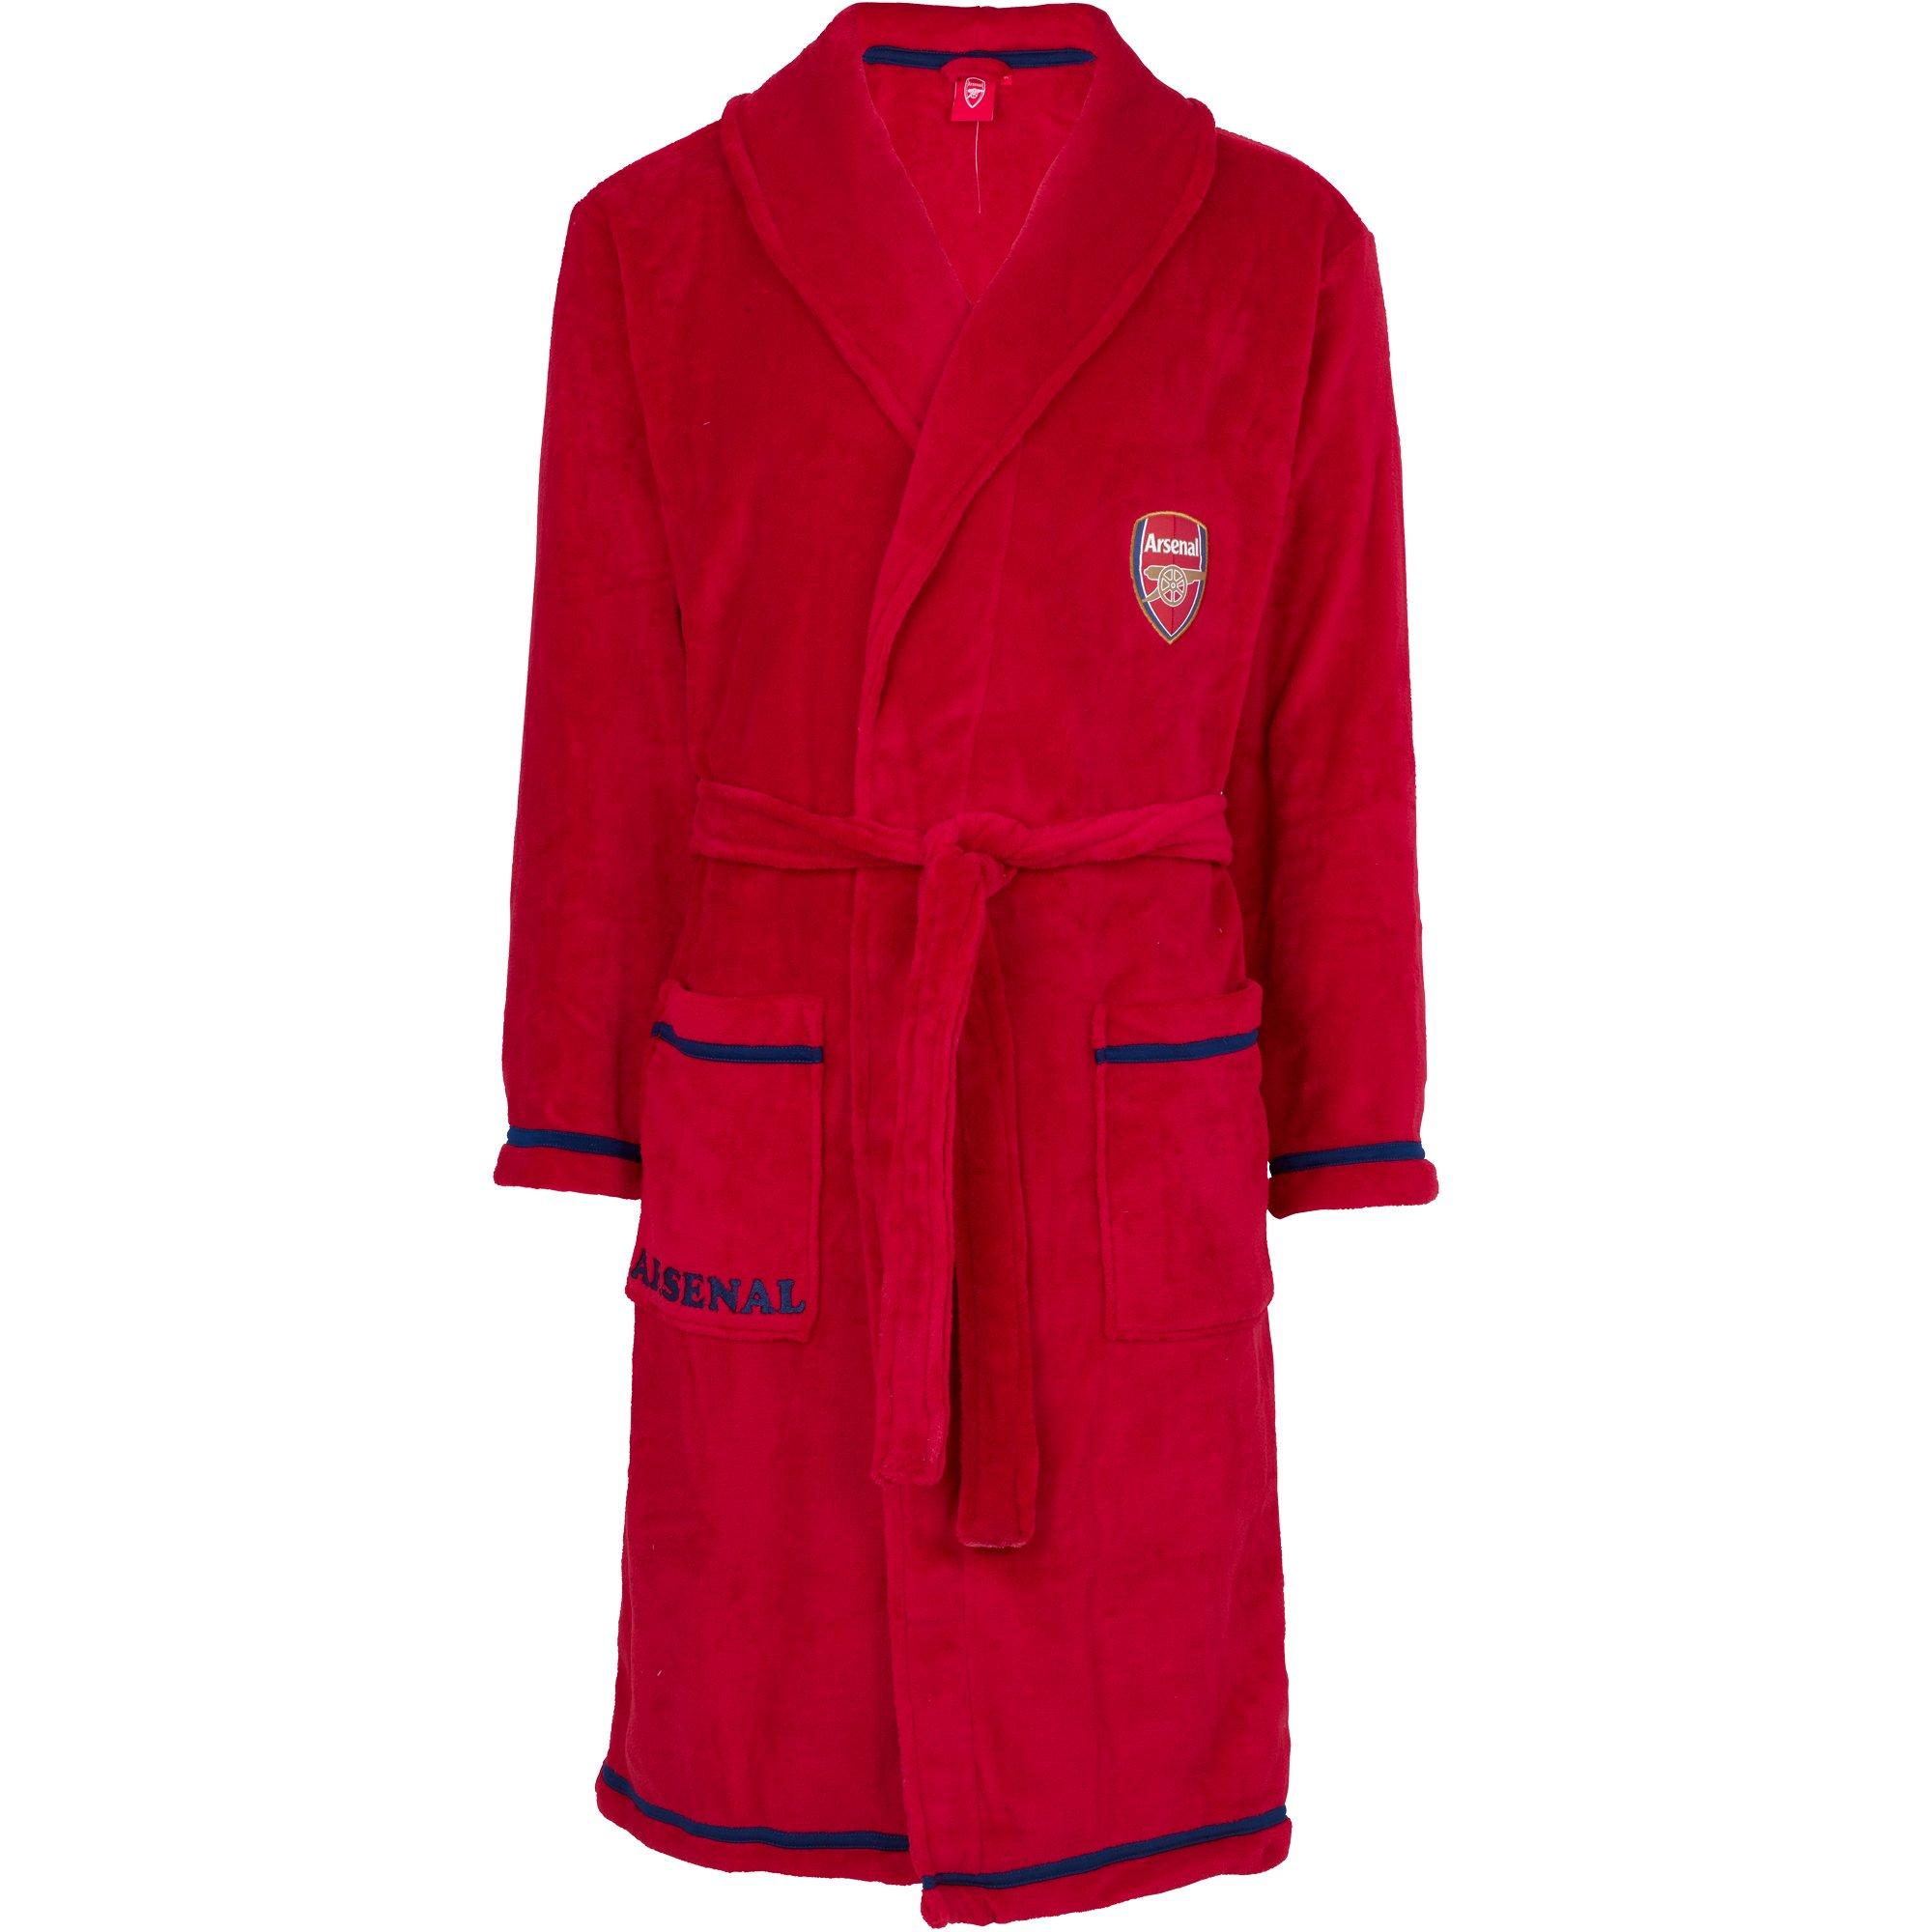 Arsenal Unisex Fleece Red Dressing Gown, Multicolor